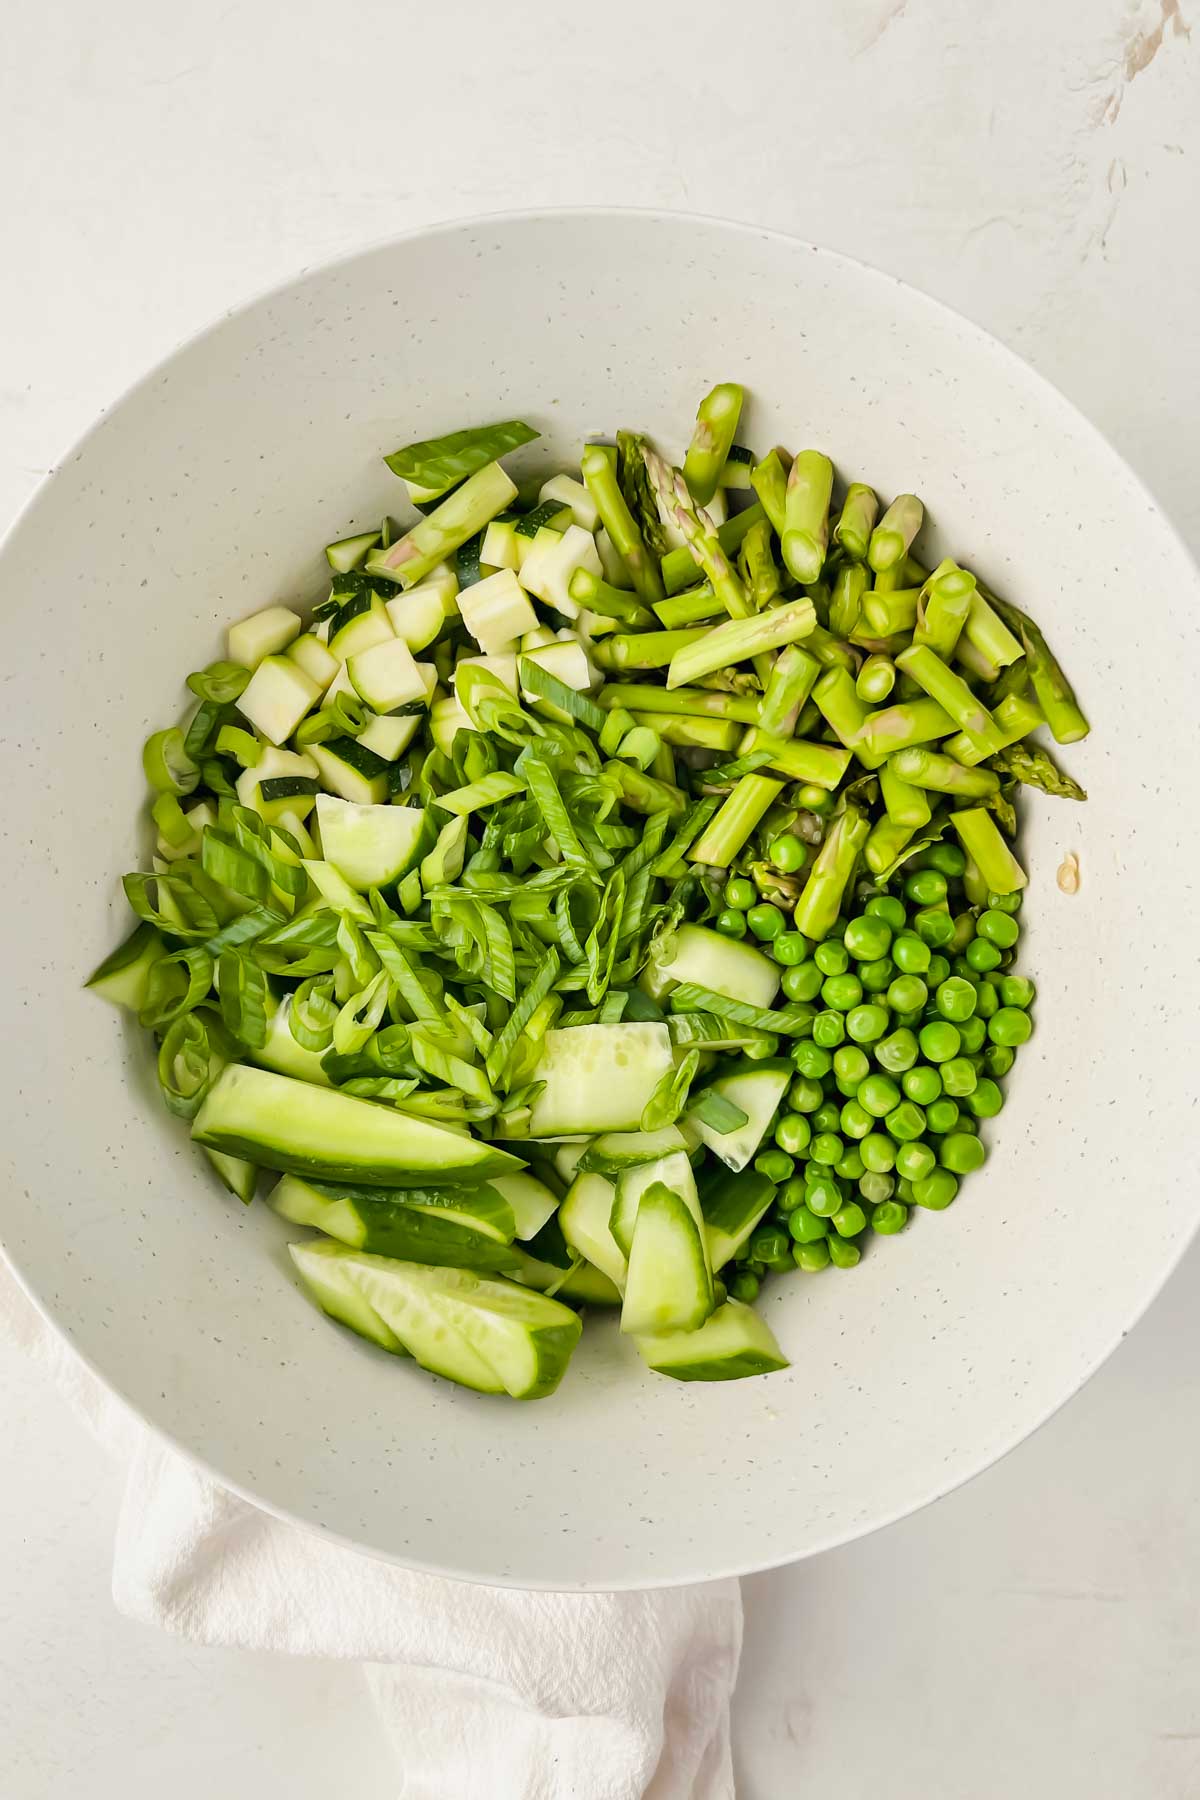 summer greens including cucumbers, peas, zucchini, and asparagus in white mixing bowl.